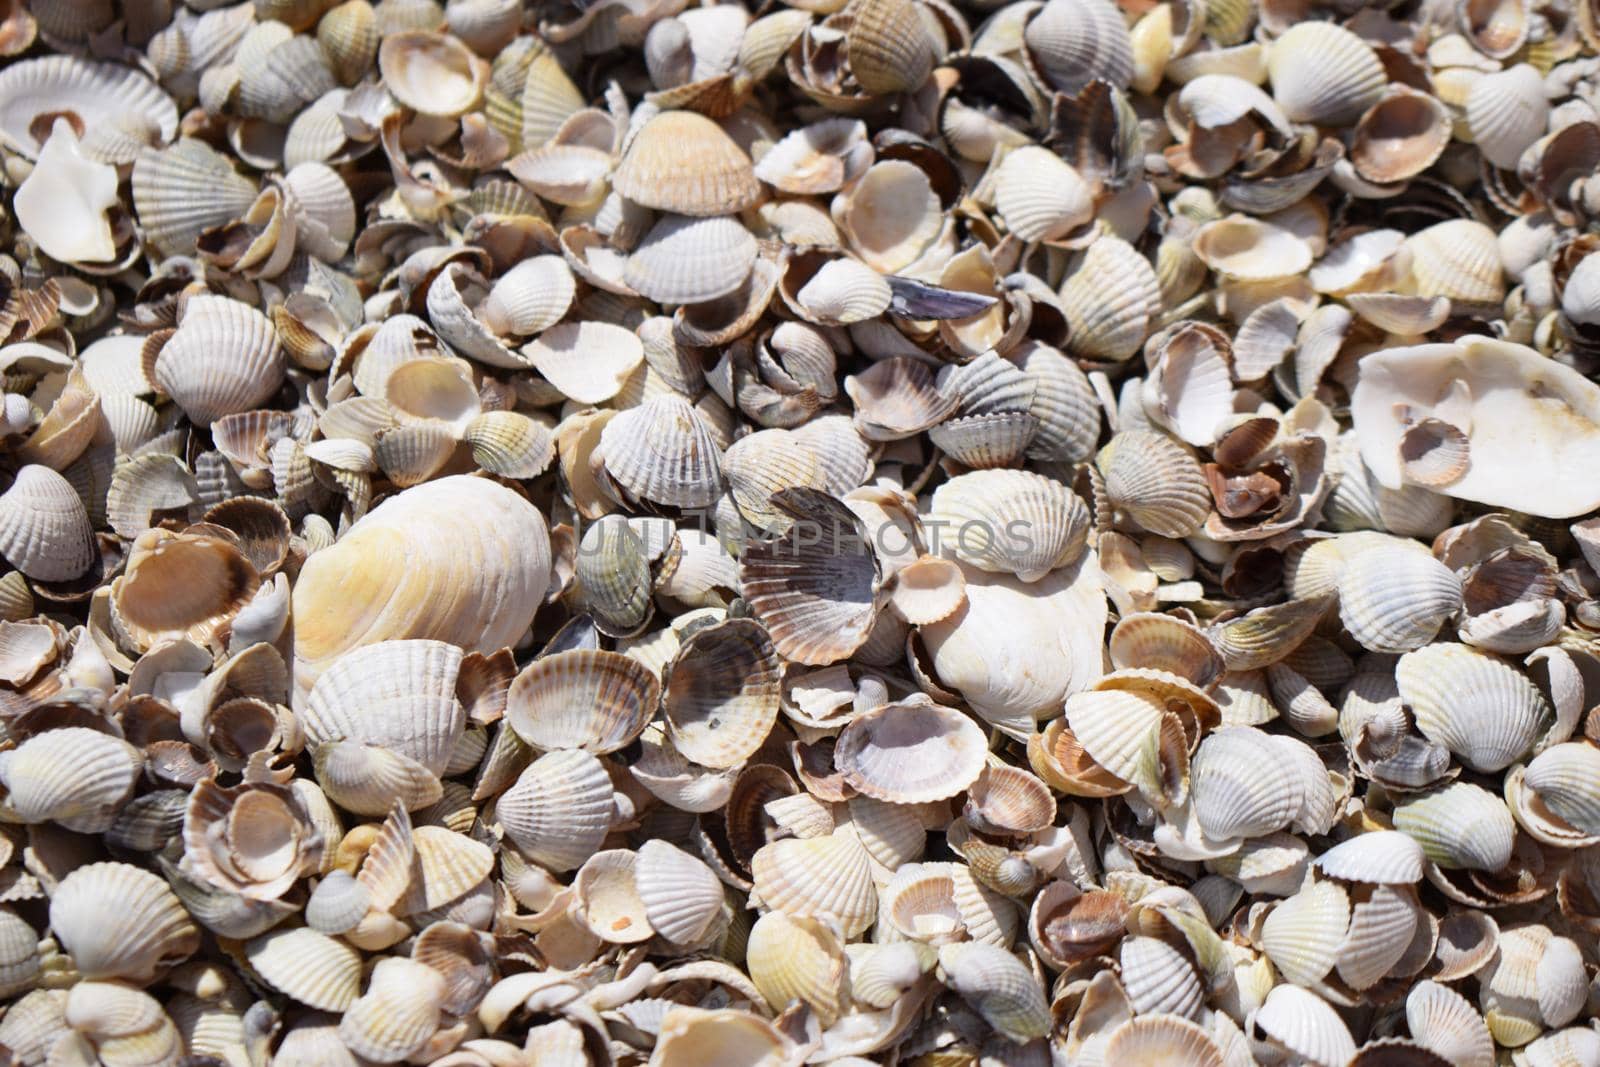 Sea shells composition. Natural background of broken seashells on the beach.